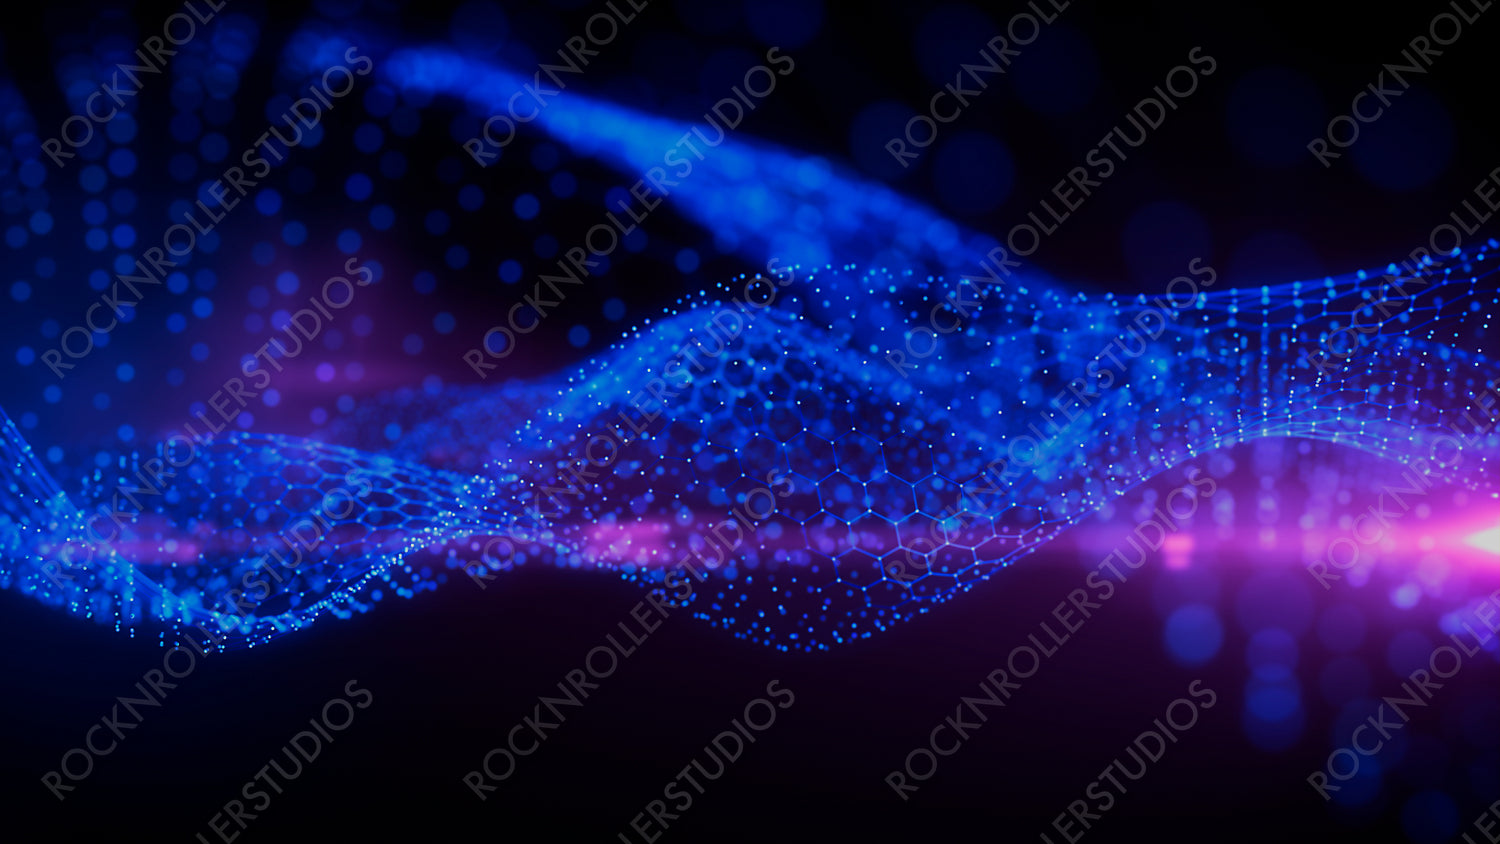 Abstract Science Technology background. Blue, Medical or Healthcare concept. 3D Render.